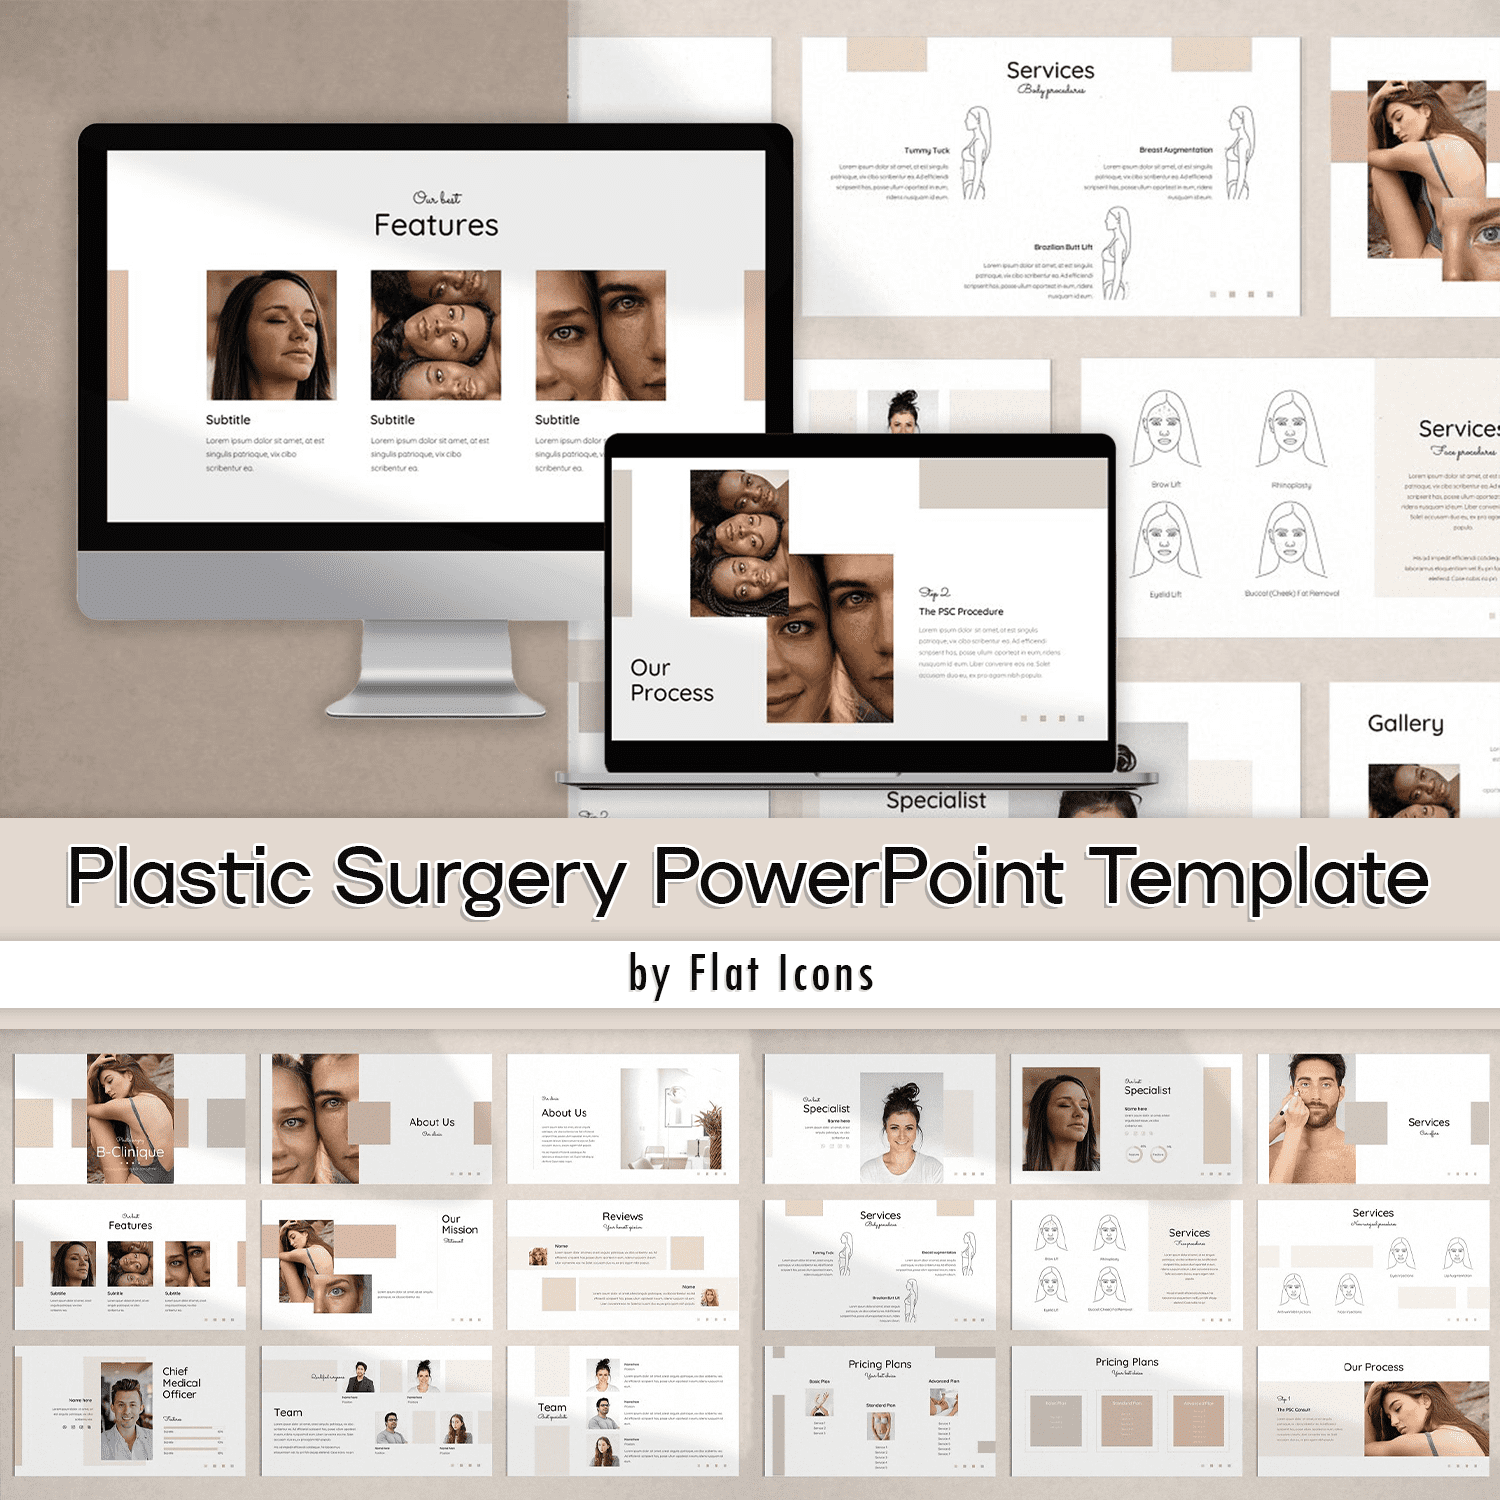 Plastic Surgery PowerPoint Template cover.